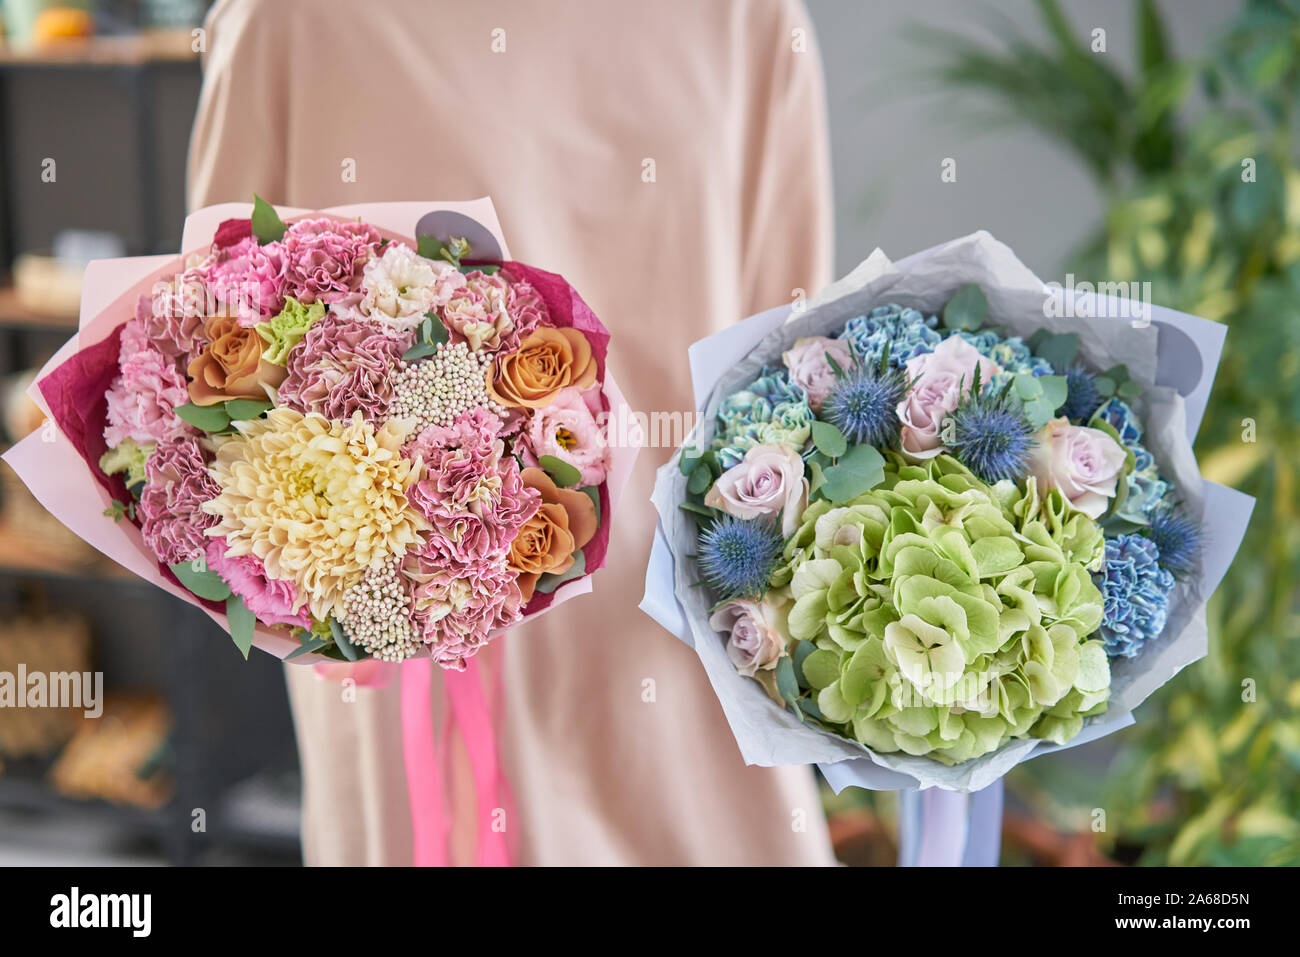 Two Beautiful bouquets of mixed flowers in womans hands. the work of the florist at a flower shop. Fresh cut flower. Stock Photo